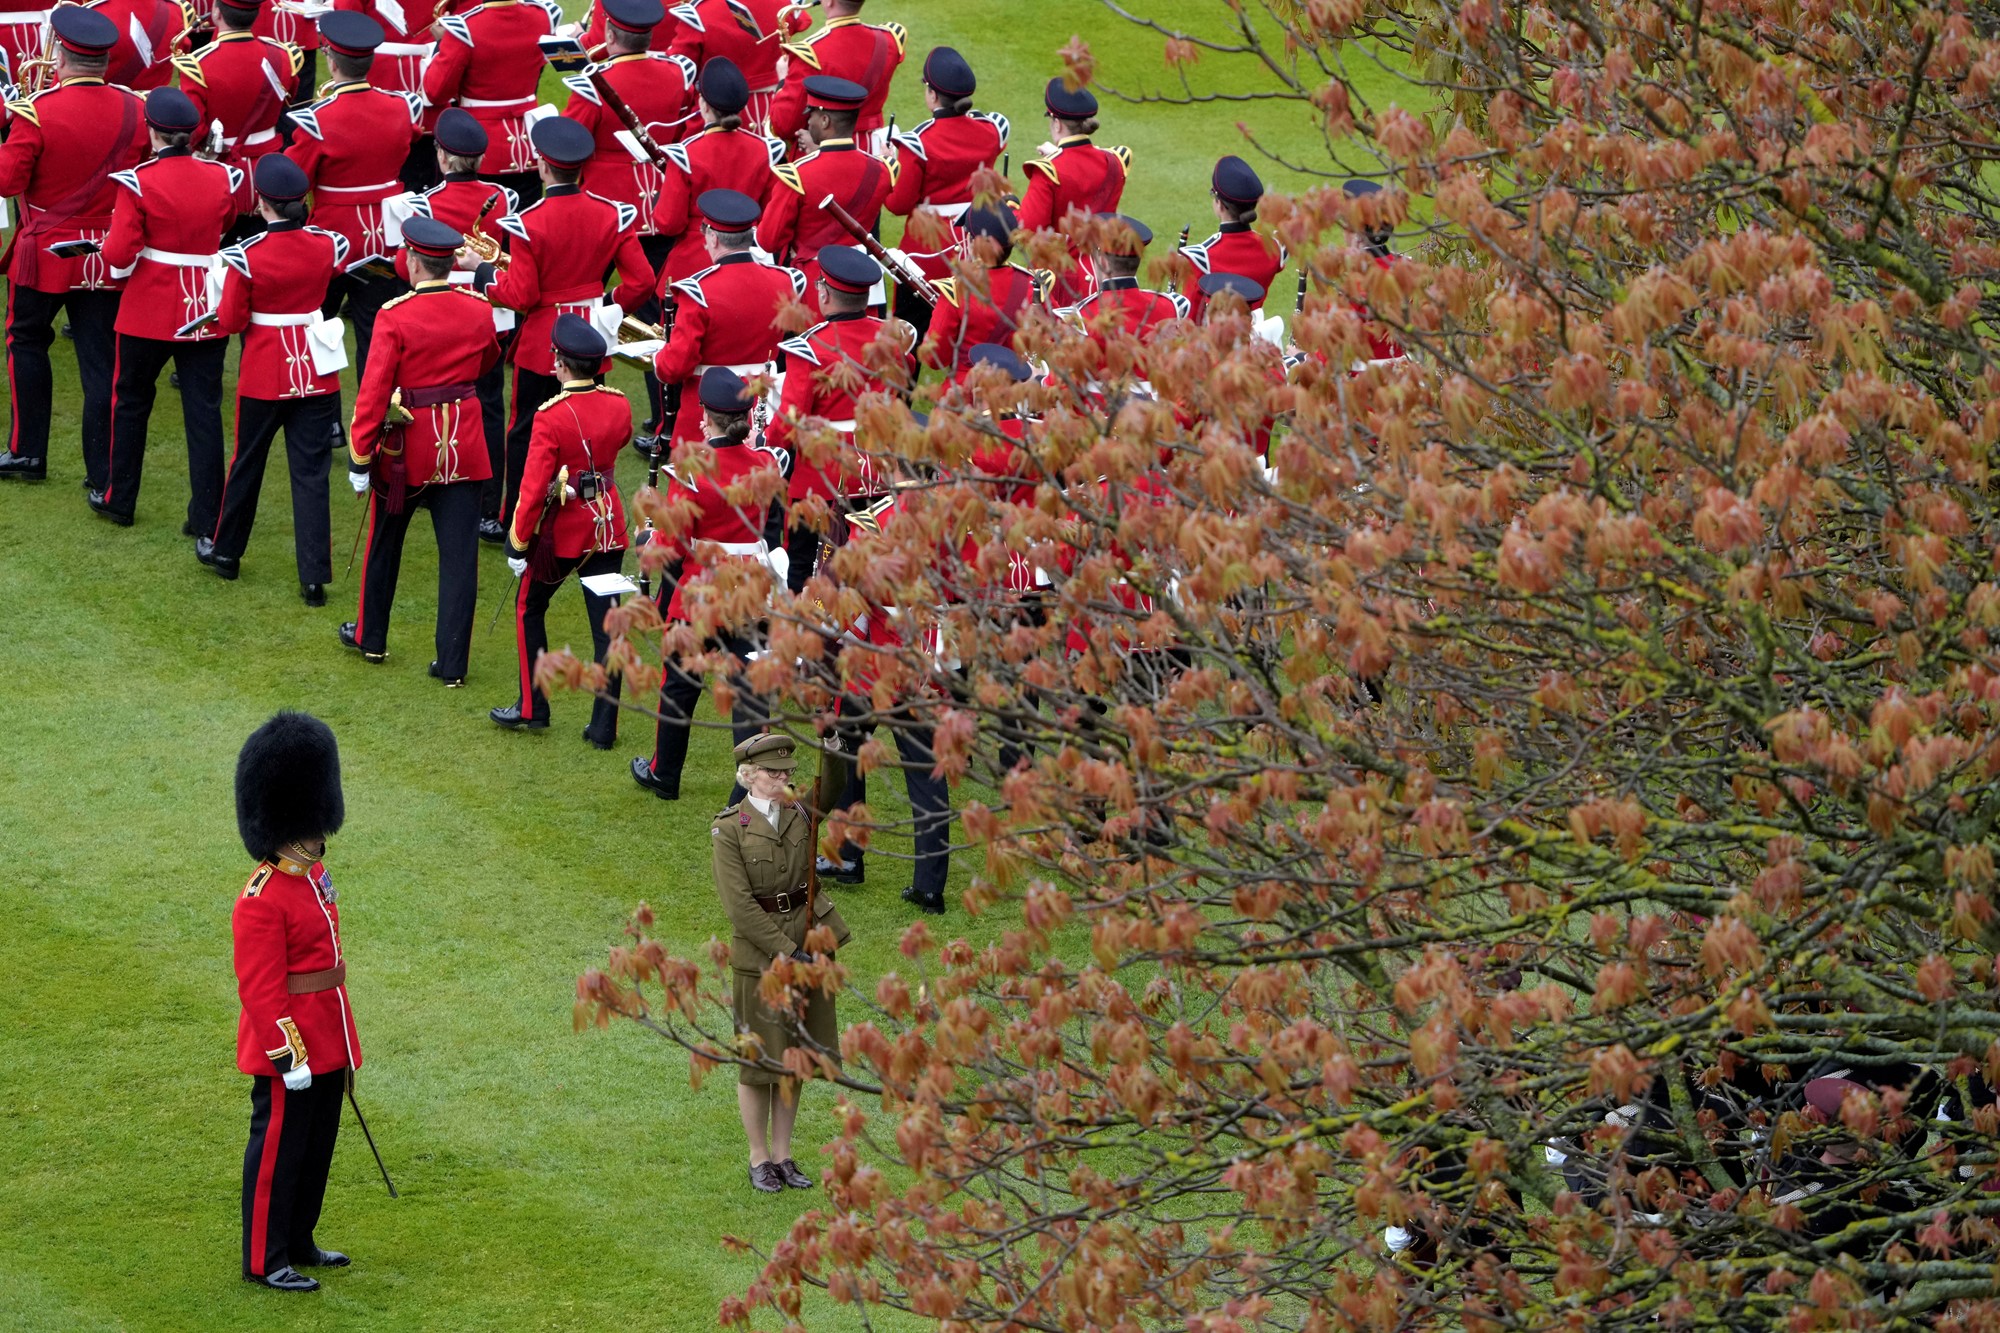 Troops march in the garden.